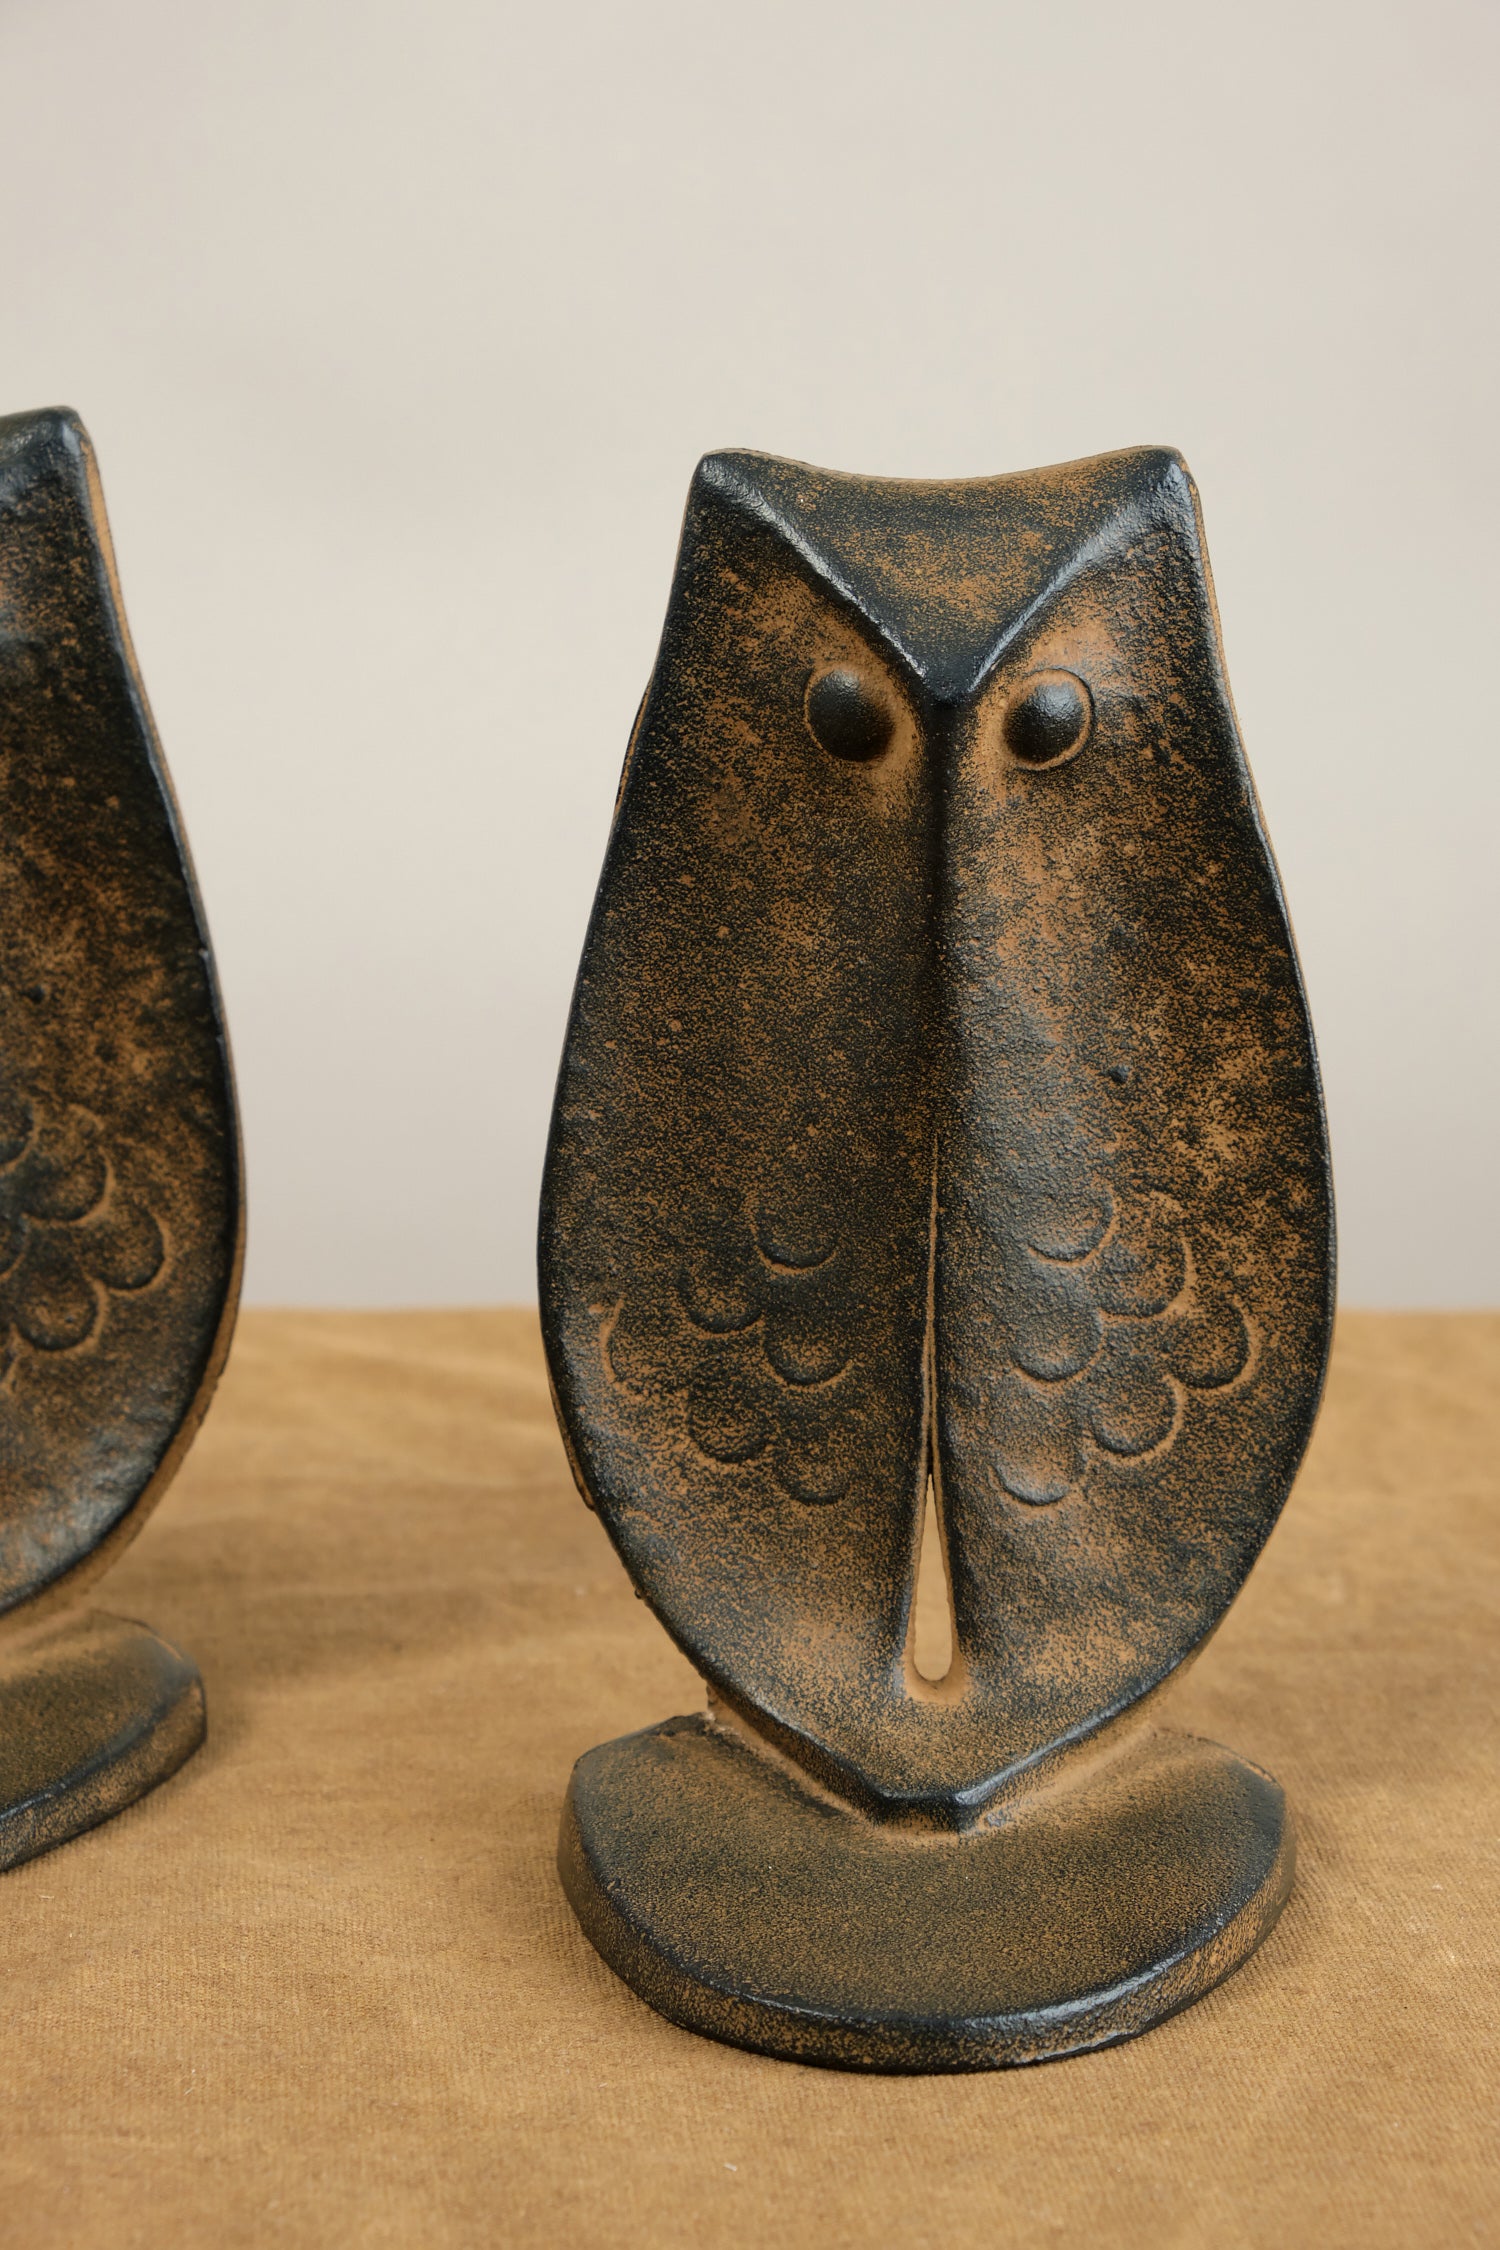 Close up of Owl Bookends